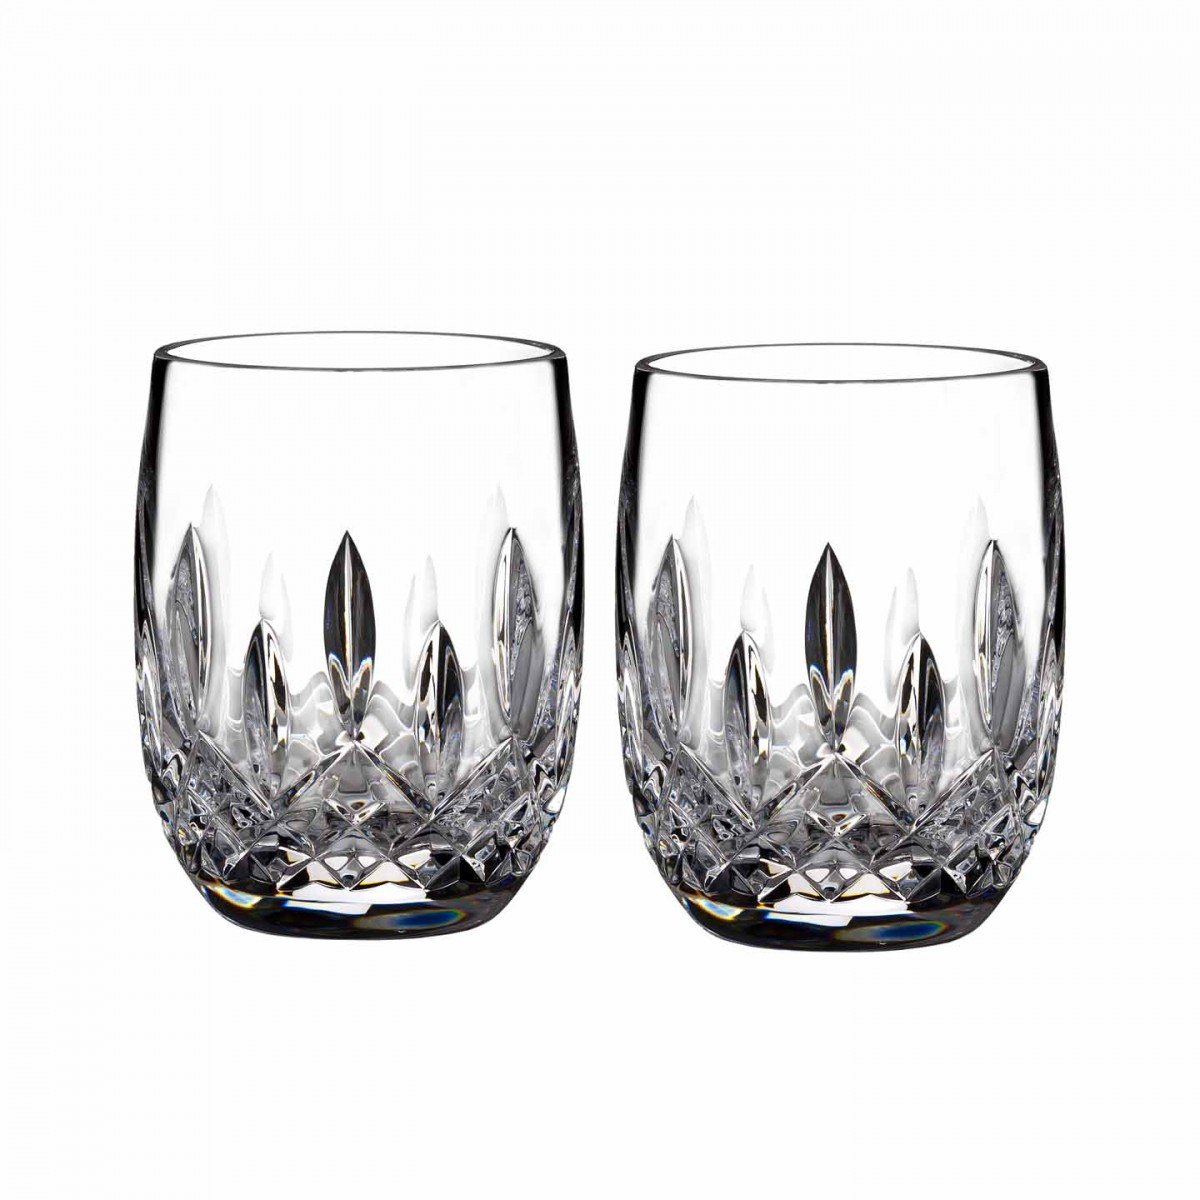 24 Perfect Waterford Lismore 8 Flared Vase 2024 free download waterford lismore 8 flared vase of lismore connoisseur rounded tumbler set of 2 waterforda crystal for lismore connoisseur rounded tumbler set of 2